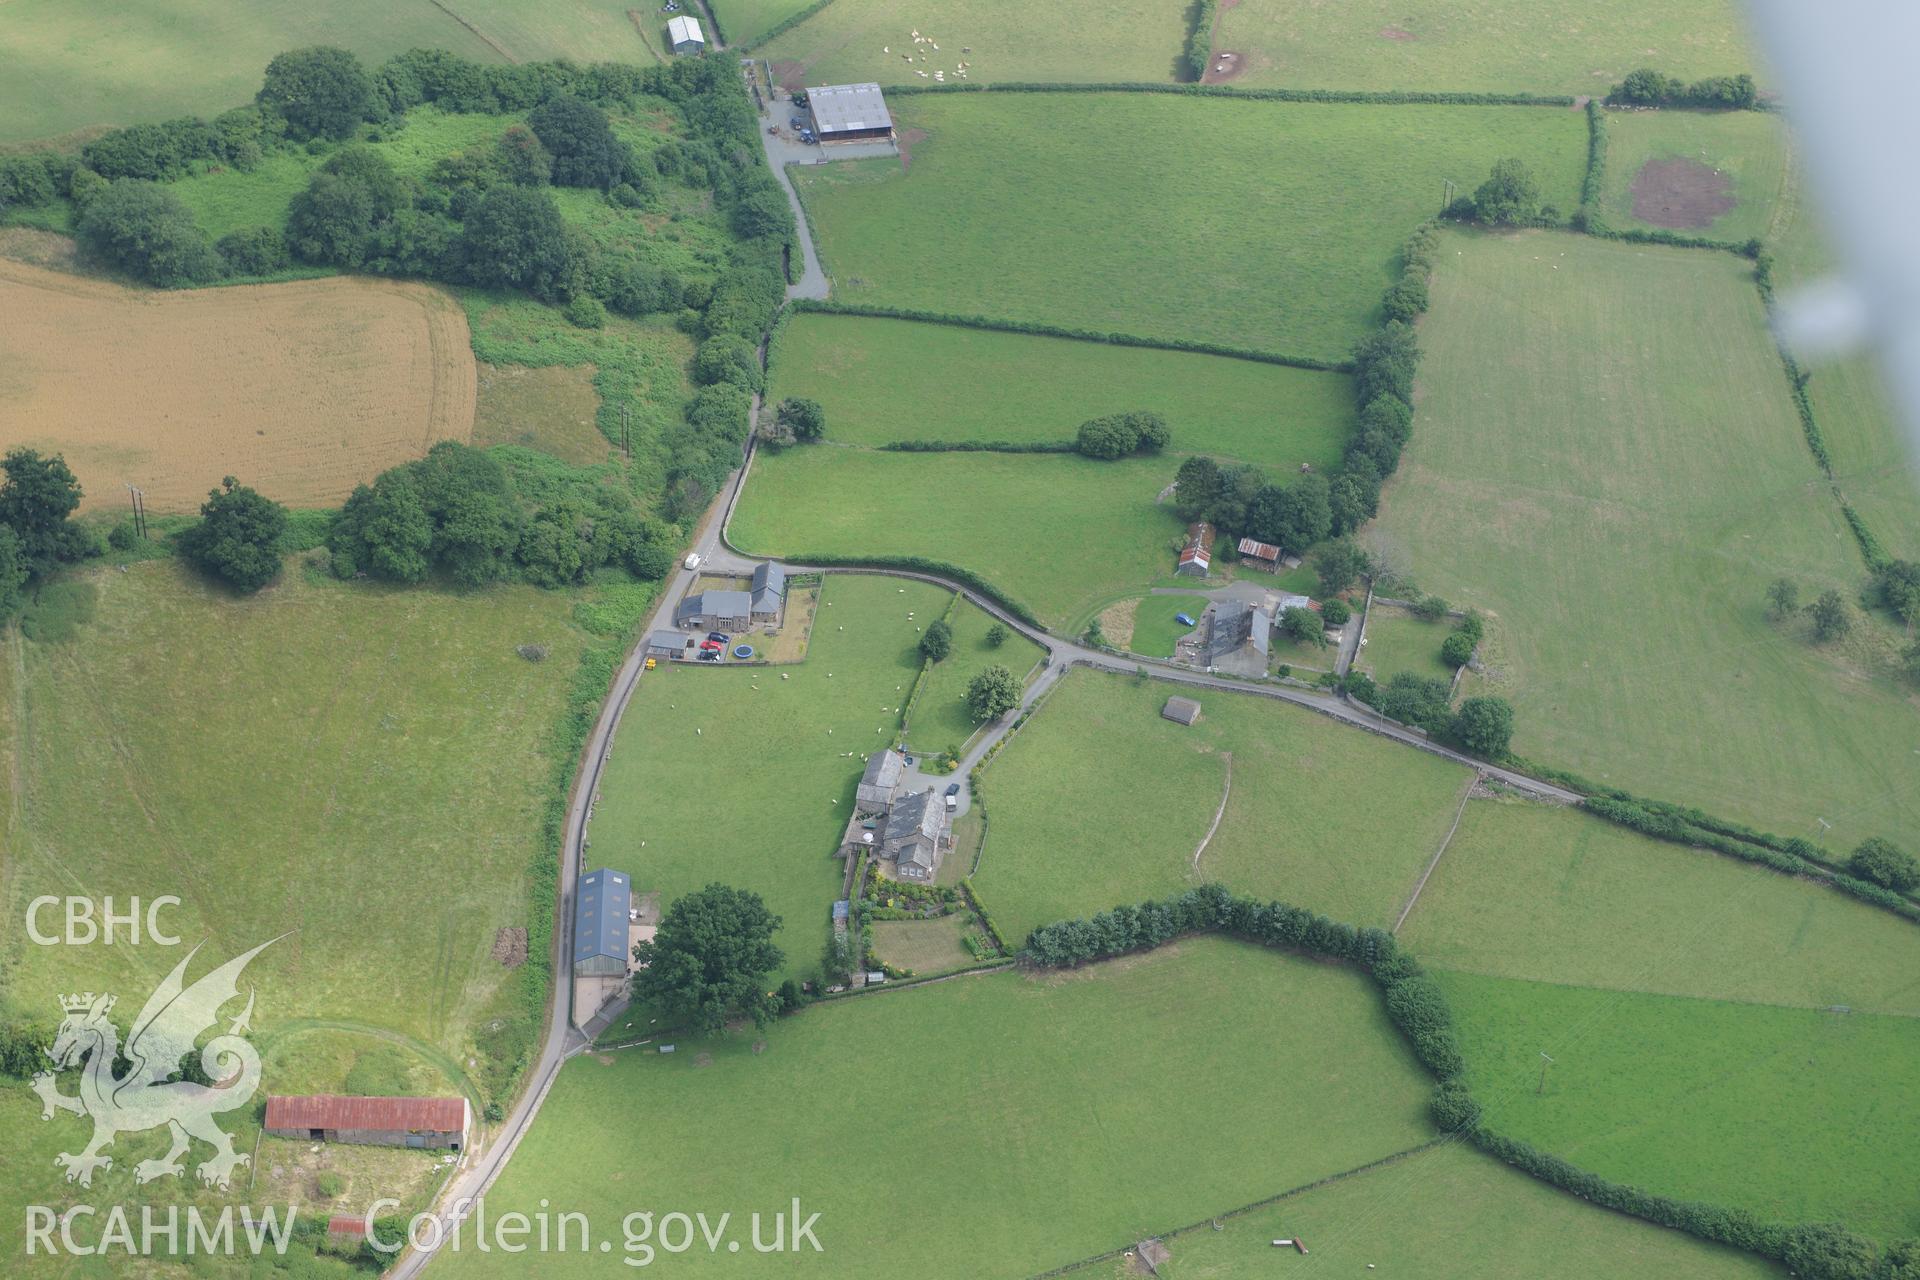 Pen-y-Gaer Roman fort, with the modern Pen-y-Gaer farm (on the right) and Greenhill farmstead (on the left). Oblique aerial photograph taken during the Royal Commission?s programme of archaeological aerial reconnaissance by Toby Driver on 1st August 2013.